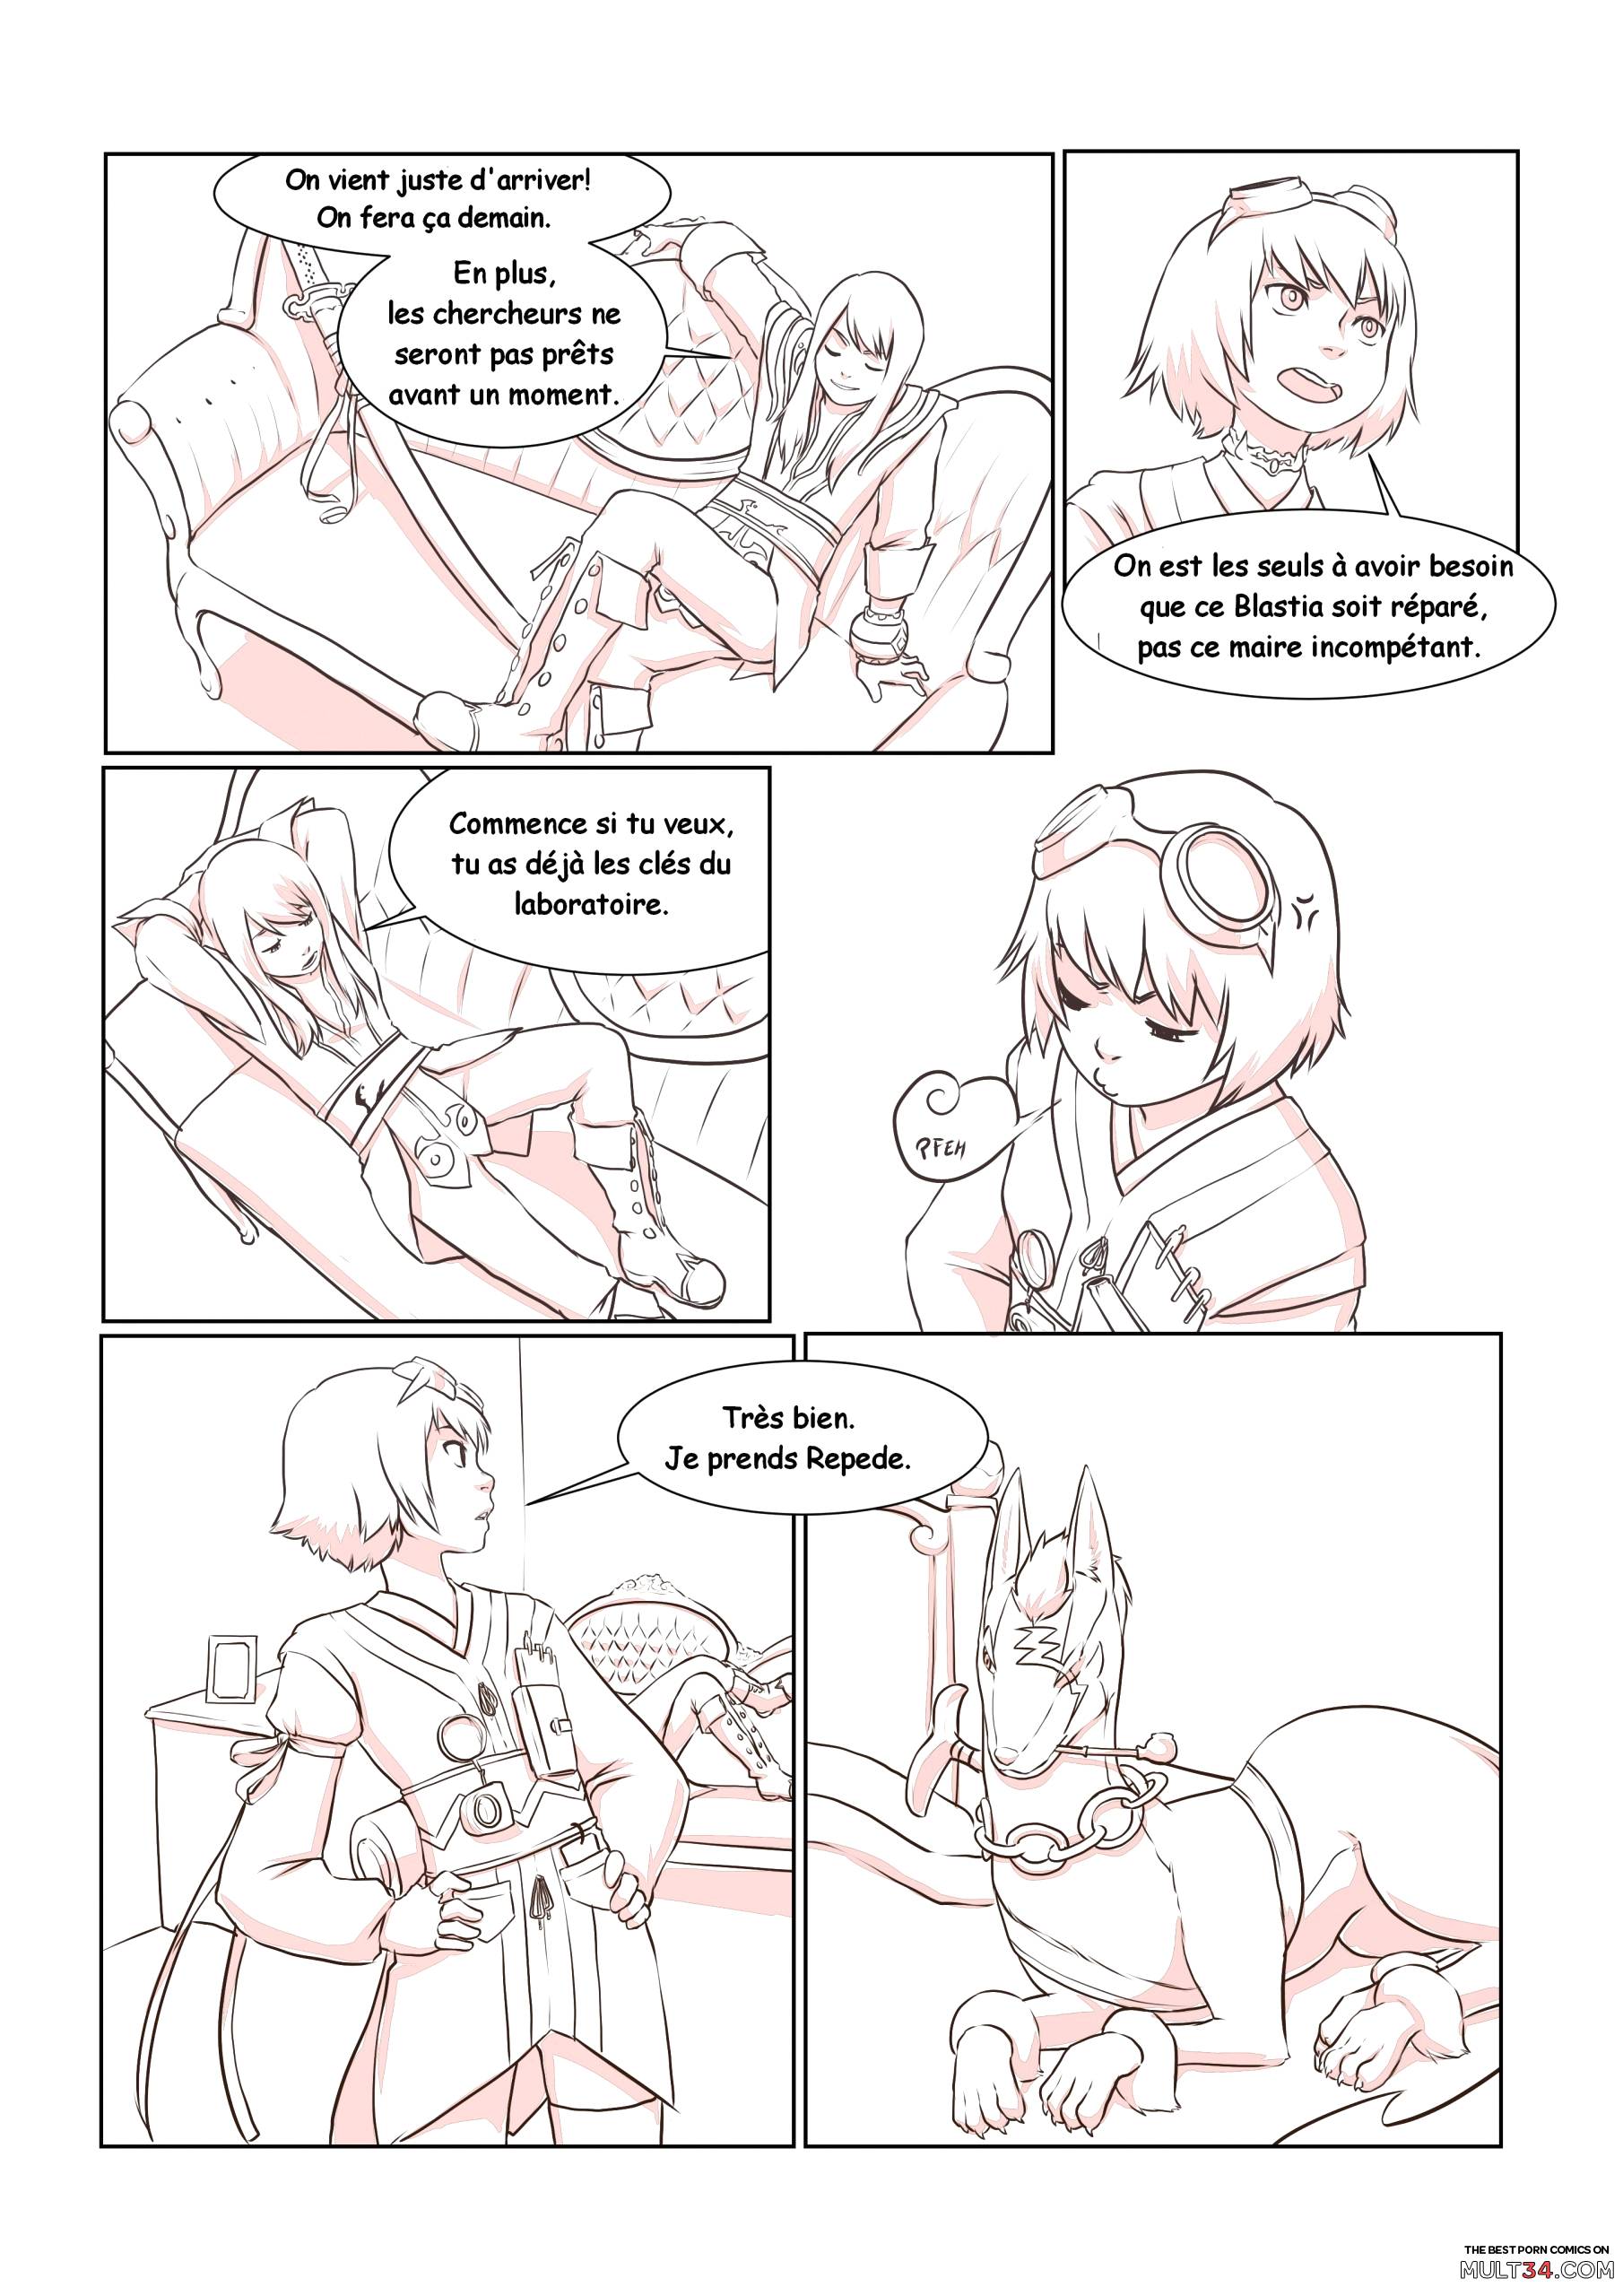 Tales of Rita and Repede - Episode 1 page 3